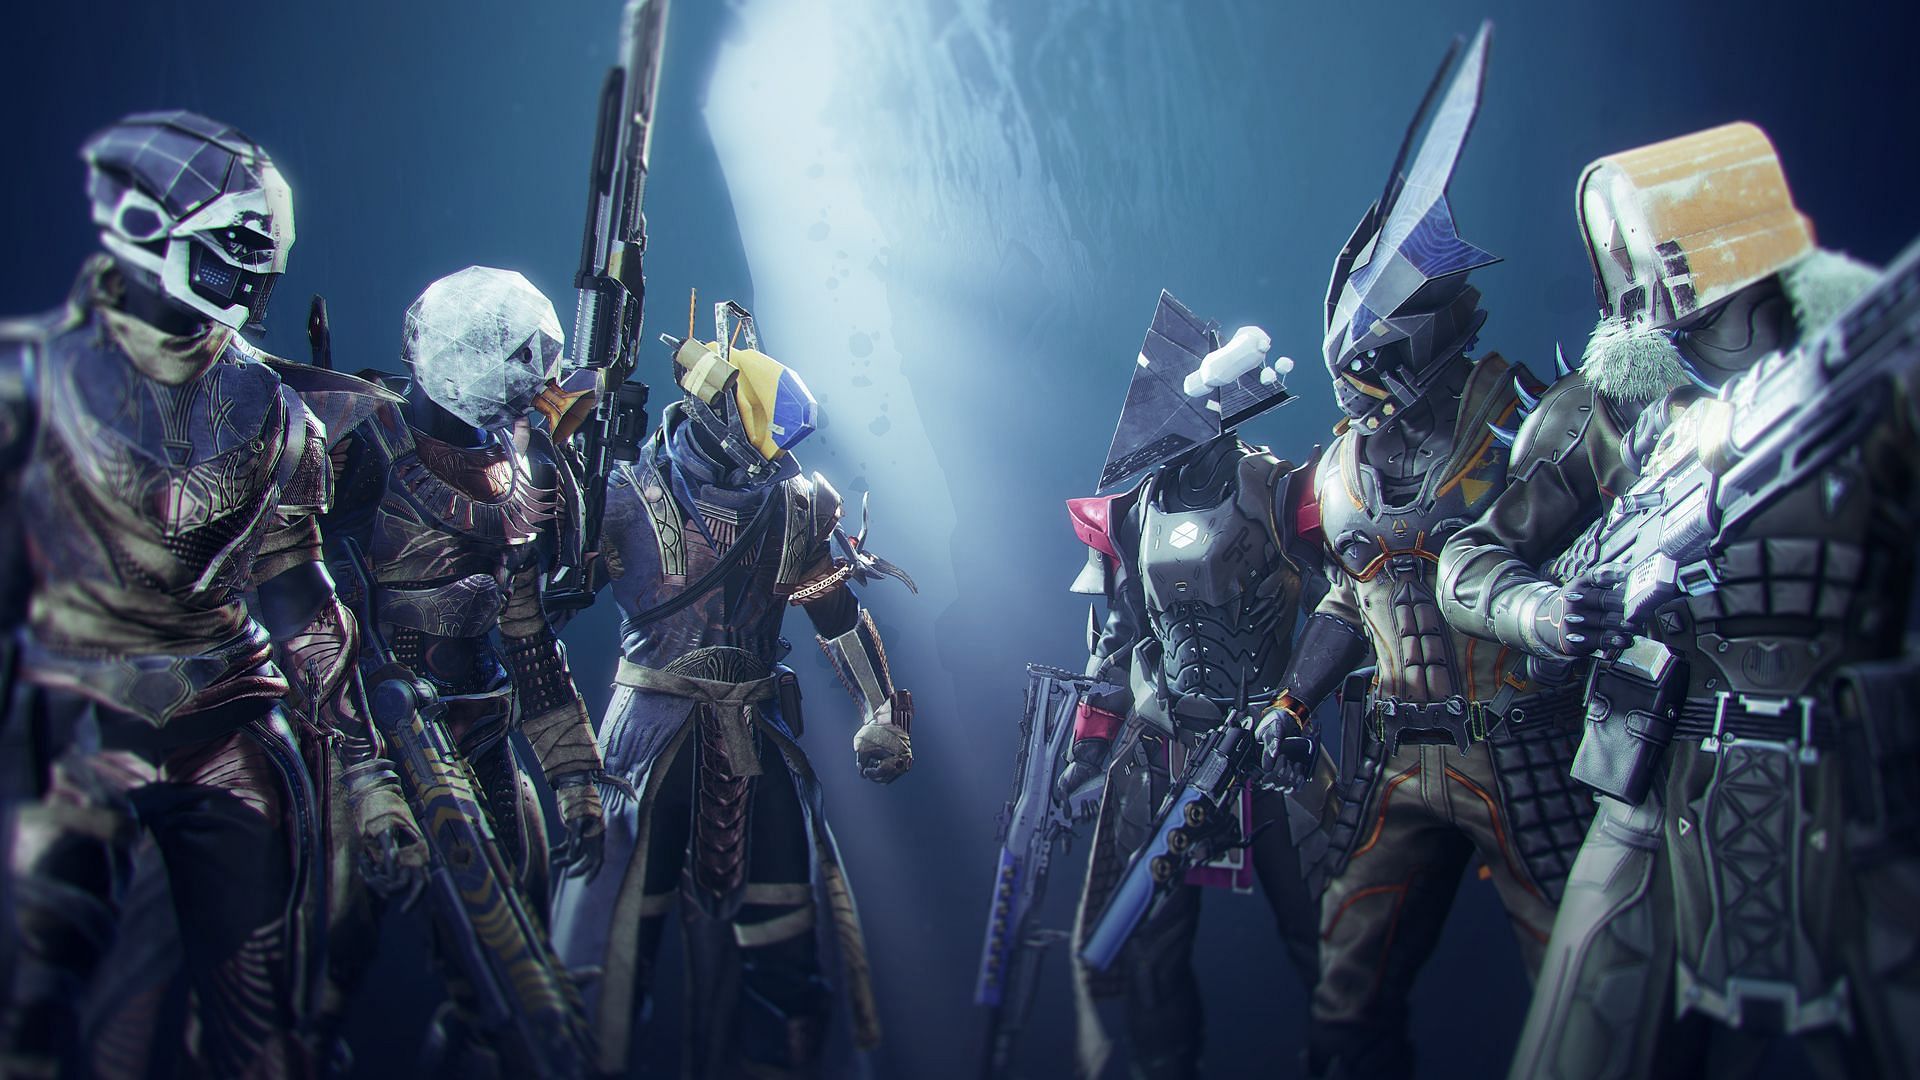 The Trials versus screen before the start of a match (Image via Bungie)